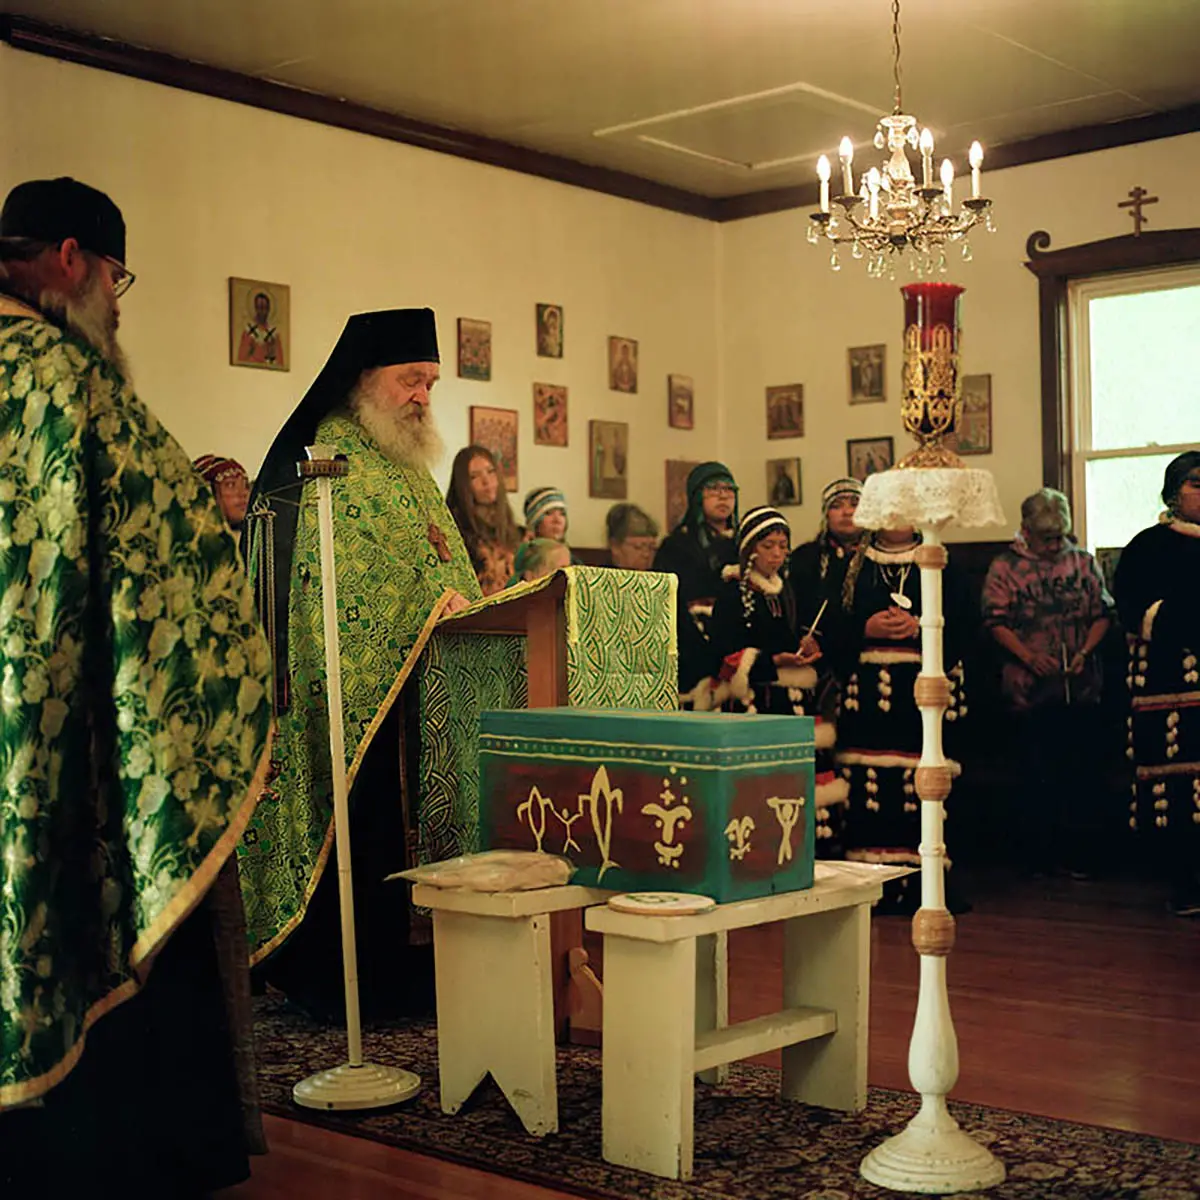 Priests in heavily patterned green and gold robing read from an altar before a decorated box of Anastasia's remains.